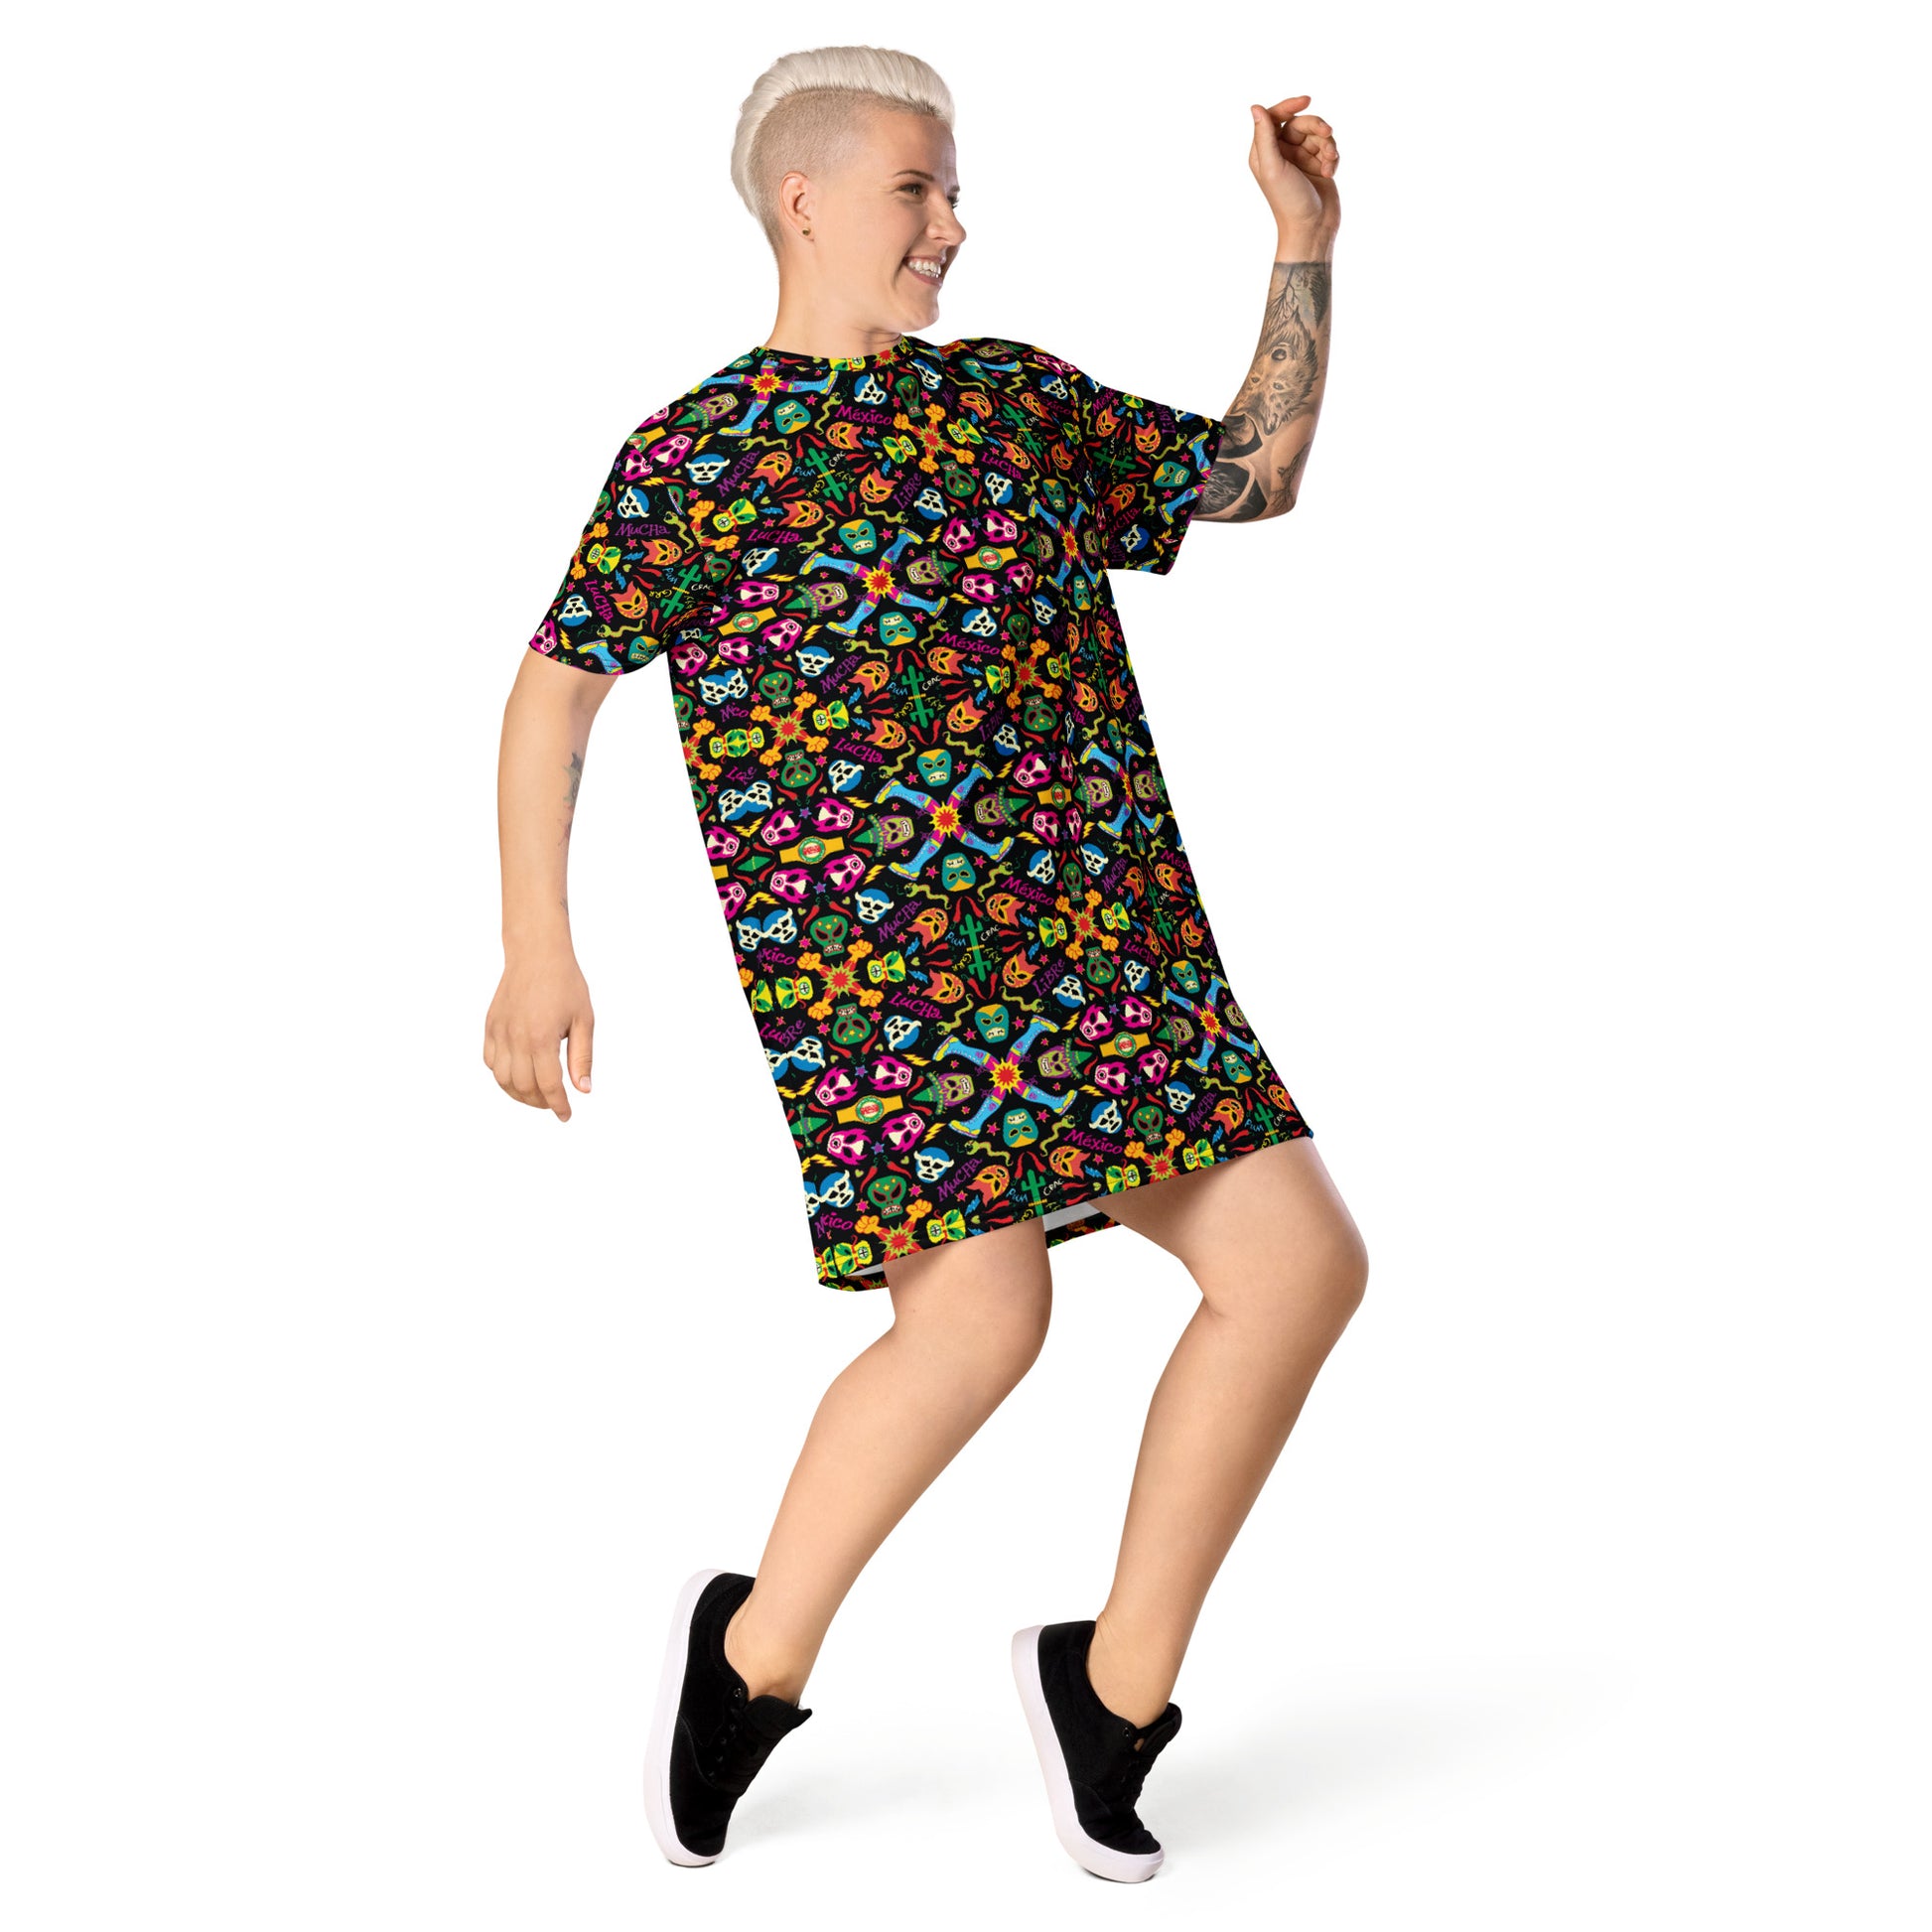 Mexican wrestling colorful party T-shirt dress. Lifestyle